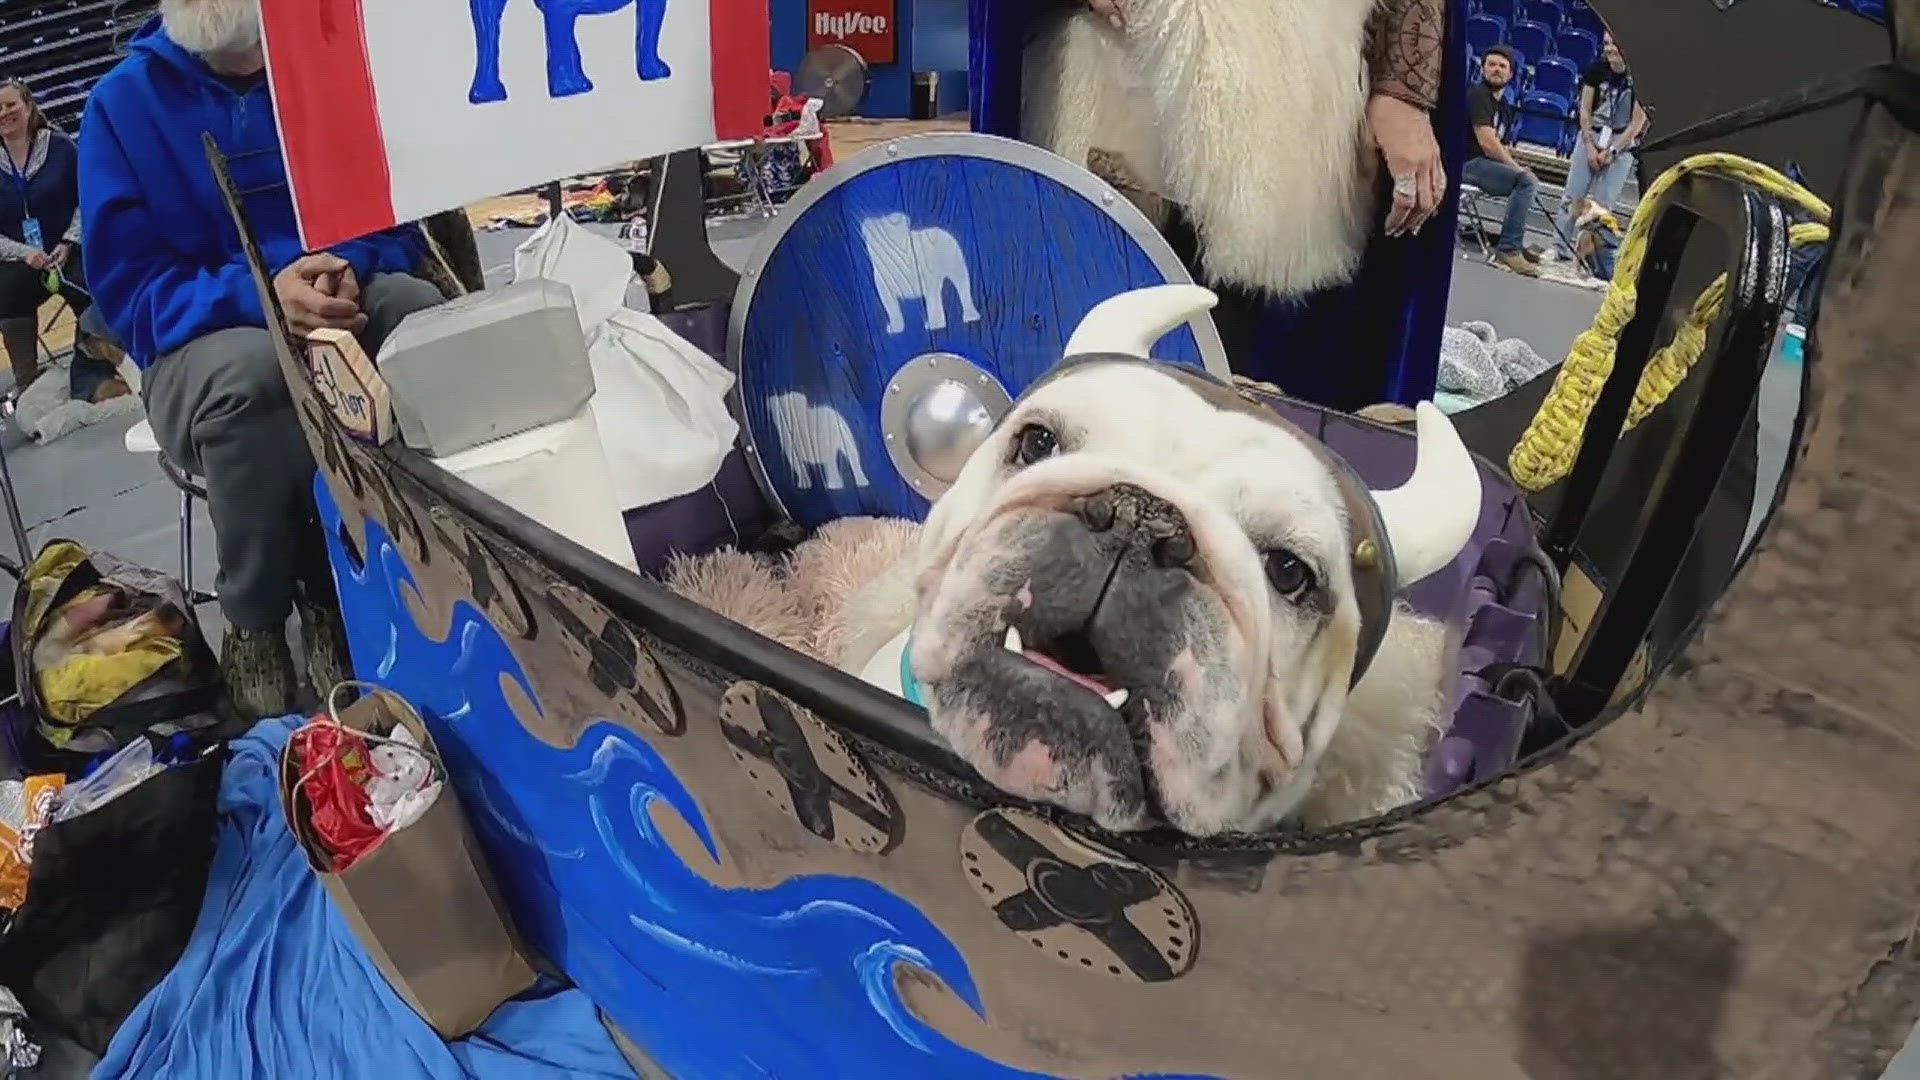 Students and alumni cheered as four-legged contestants in all manner of finery were shown off to become the next "most beautiful bulldog."